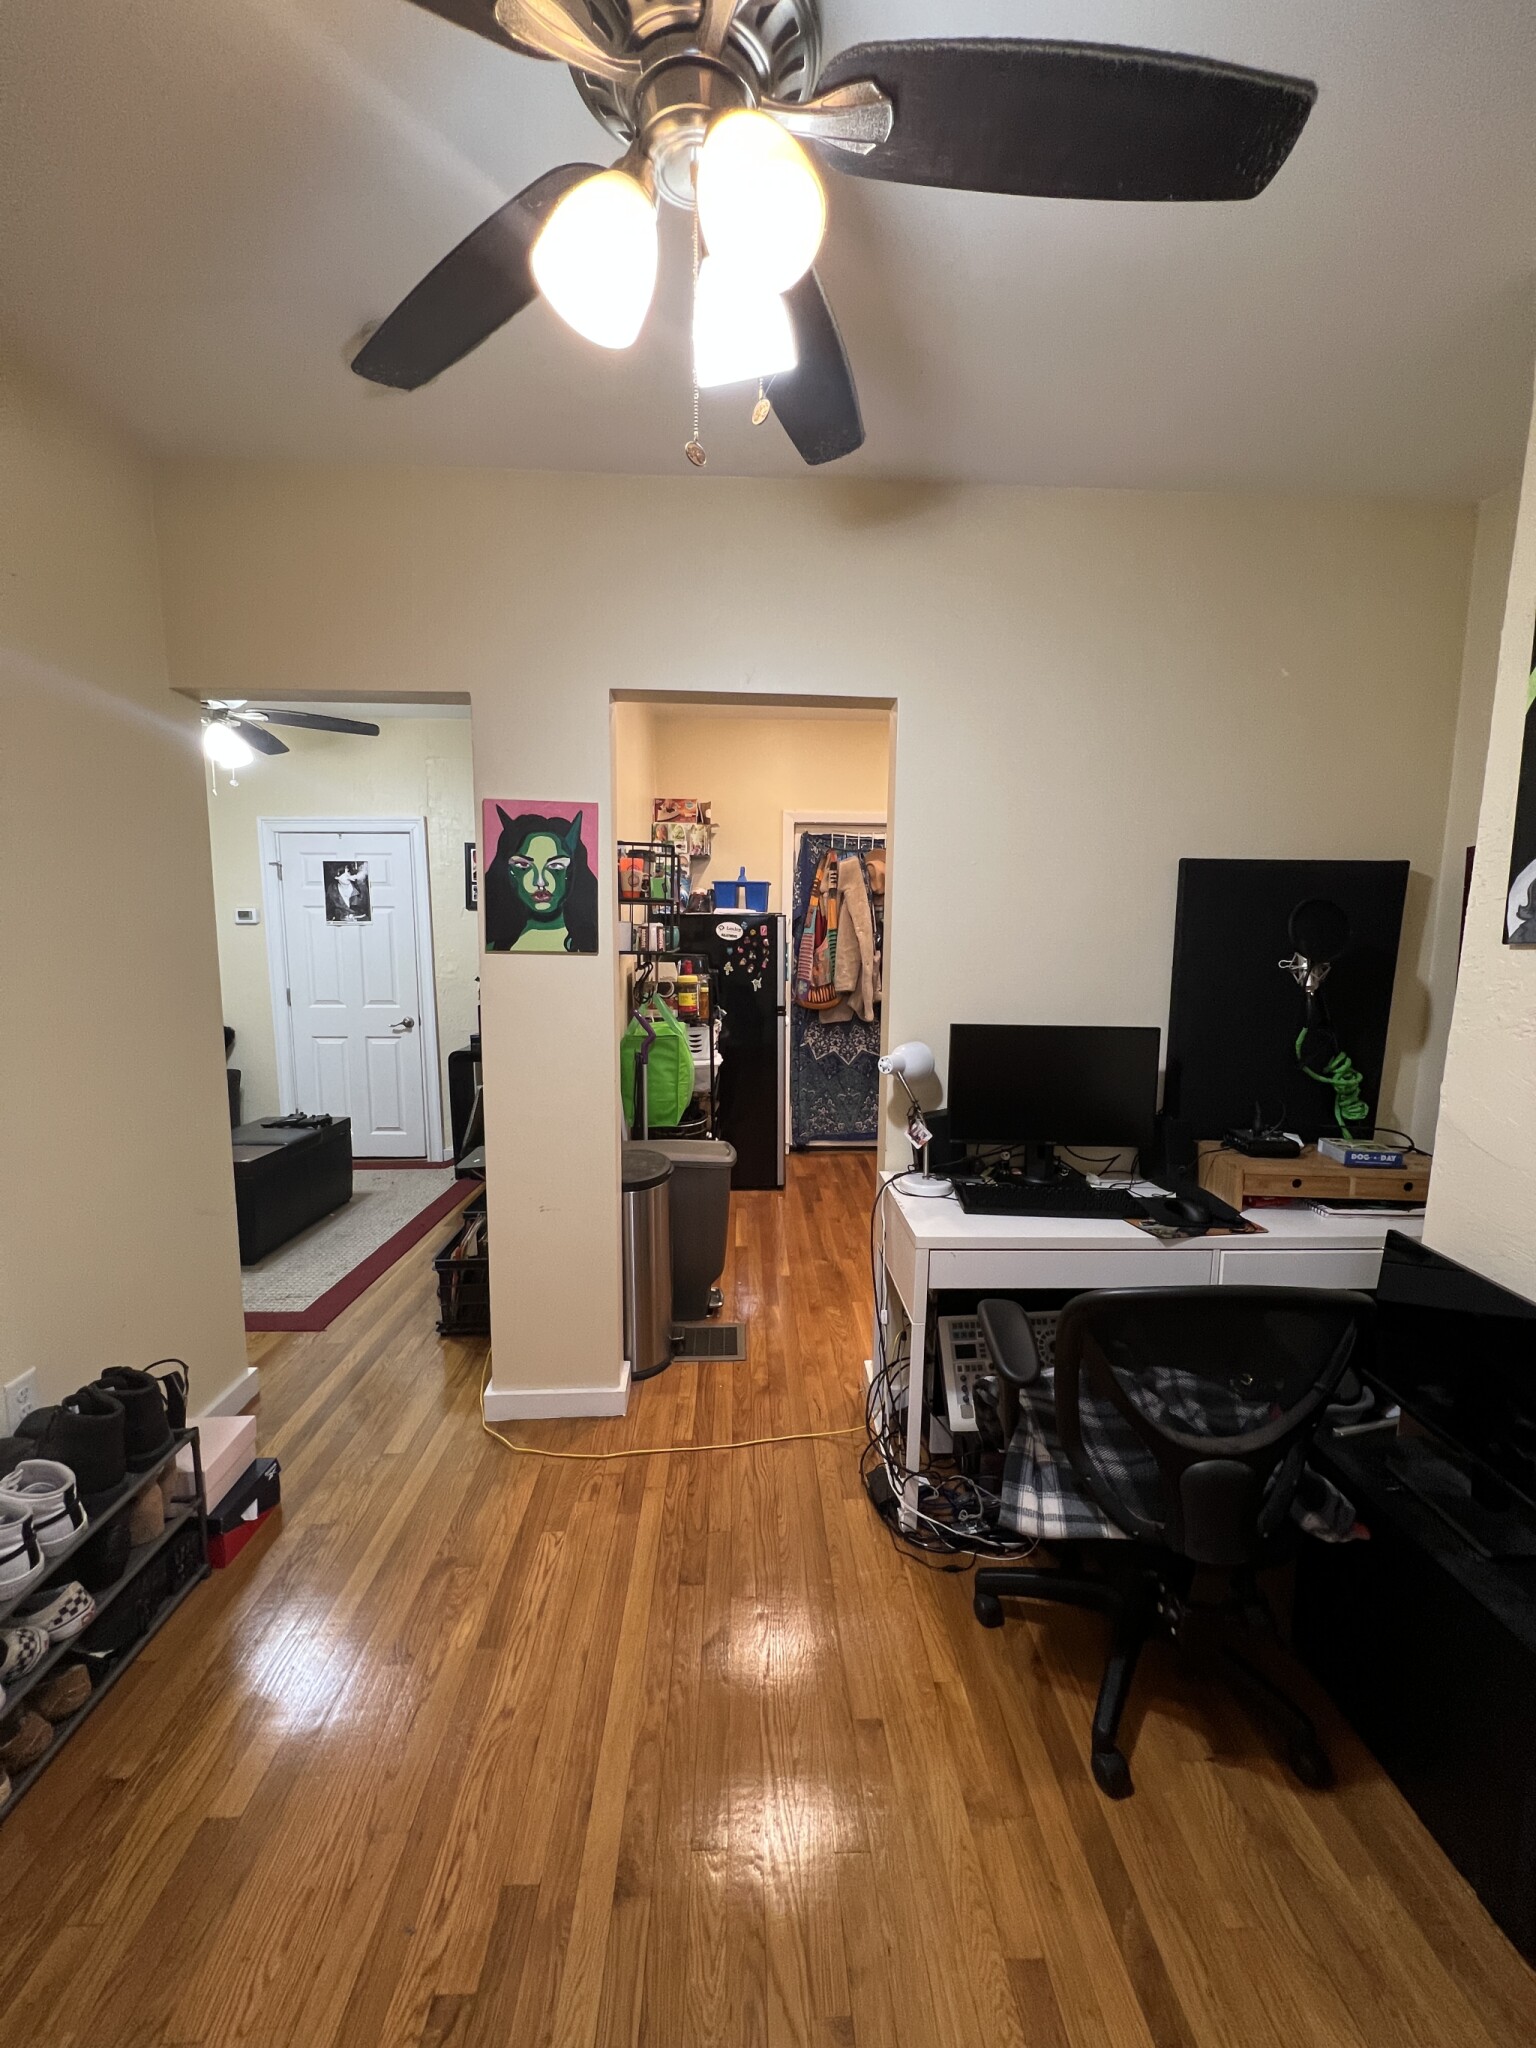 Photos of apartment on Perkins St.,Somerville MA 02145